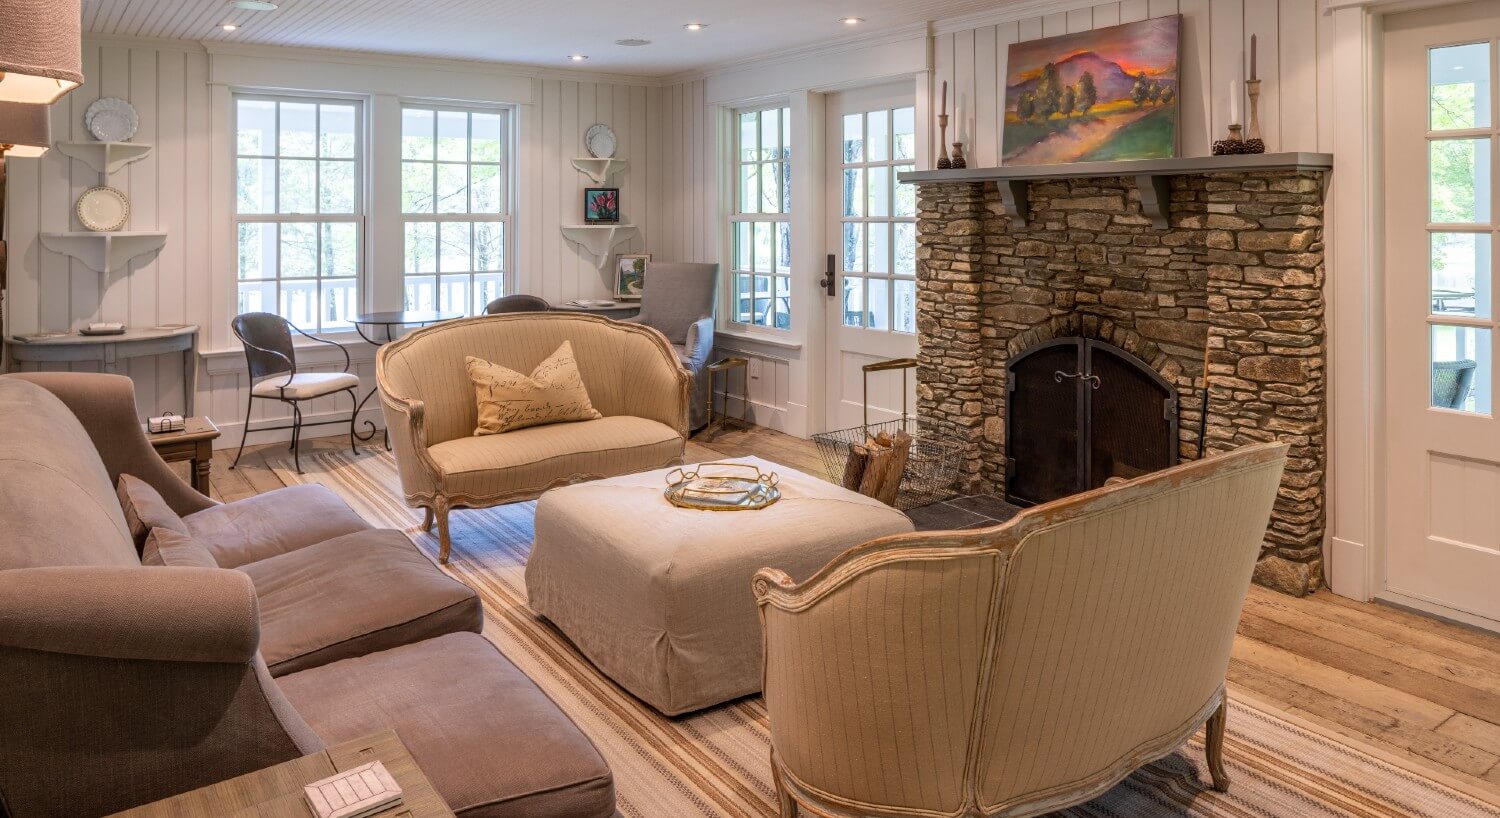 Living room with bright windows, shiplap walls and plush seating in front of a stone fireplace